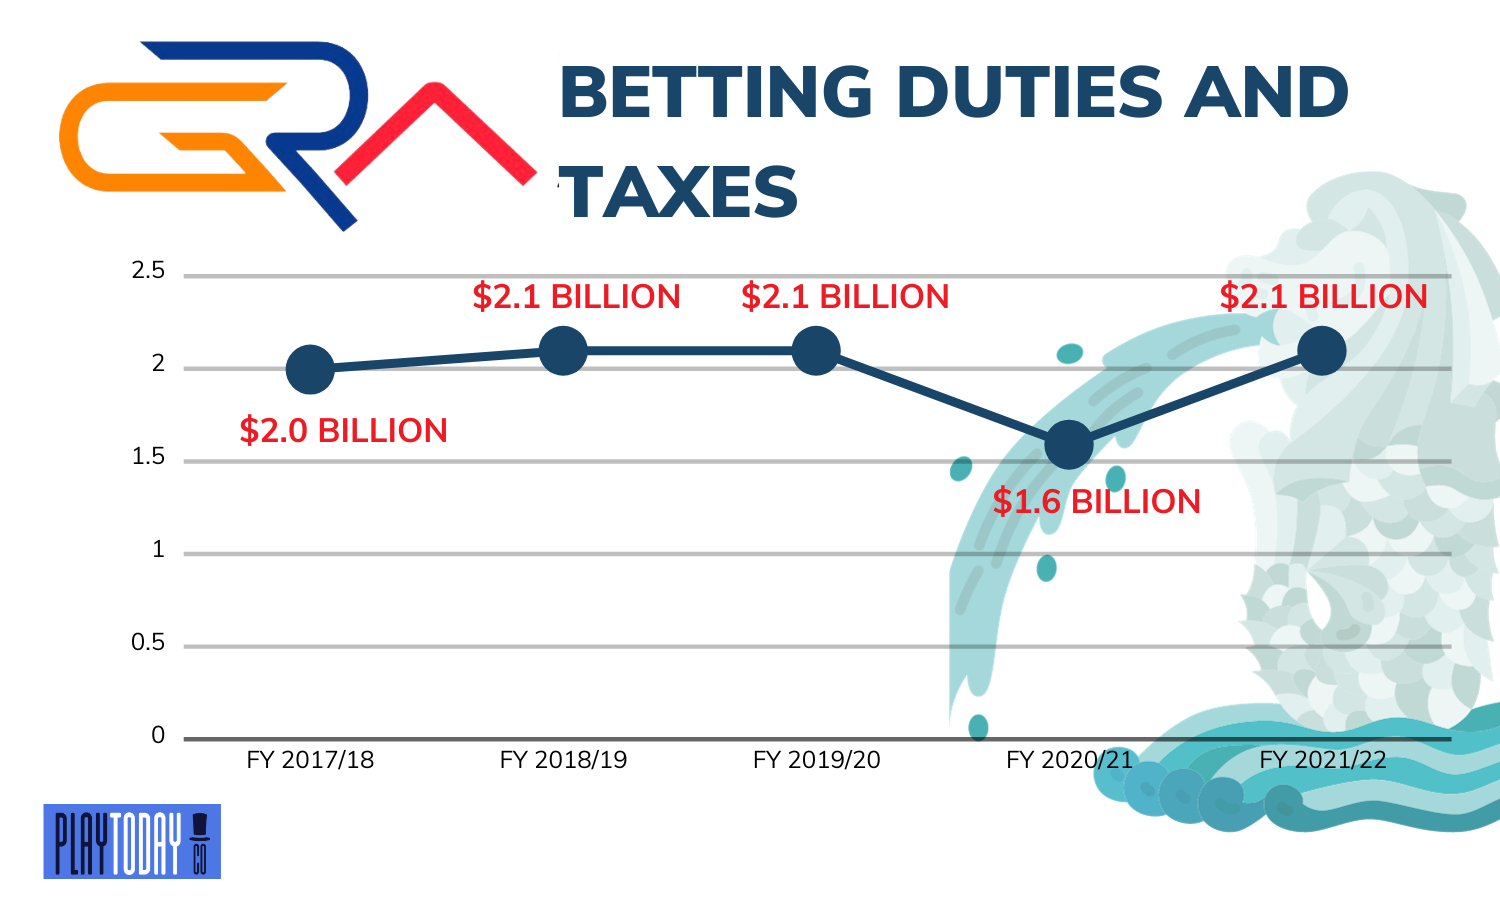 Singapore Pools Betting Duties and Taxes FY 2017/18 to FY 2021/22